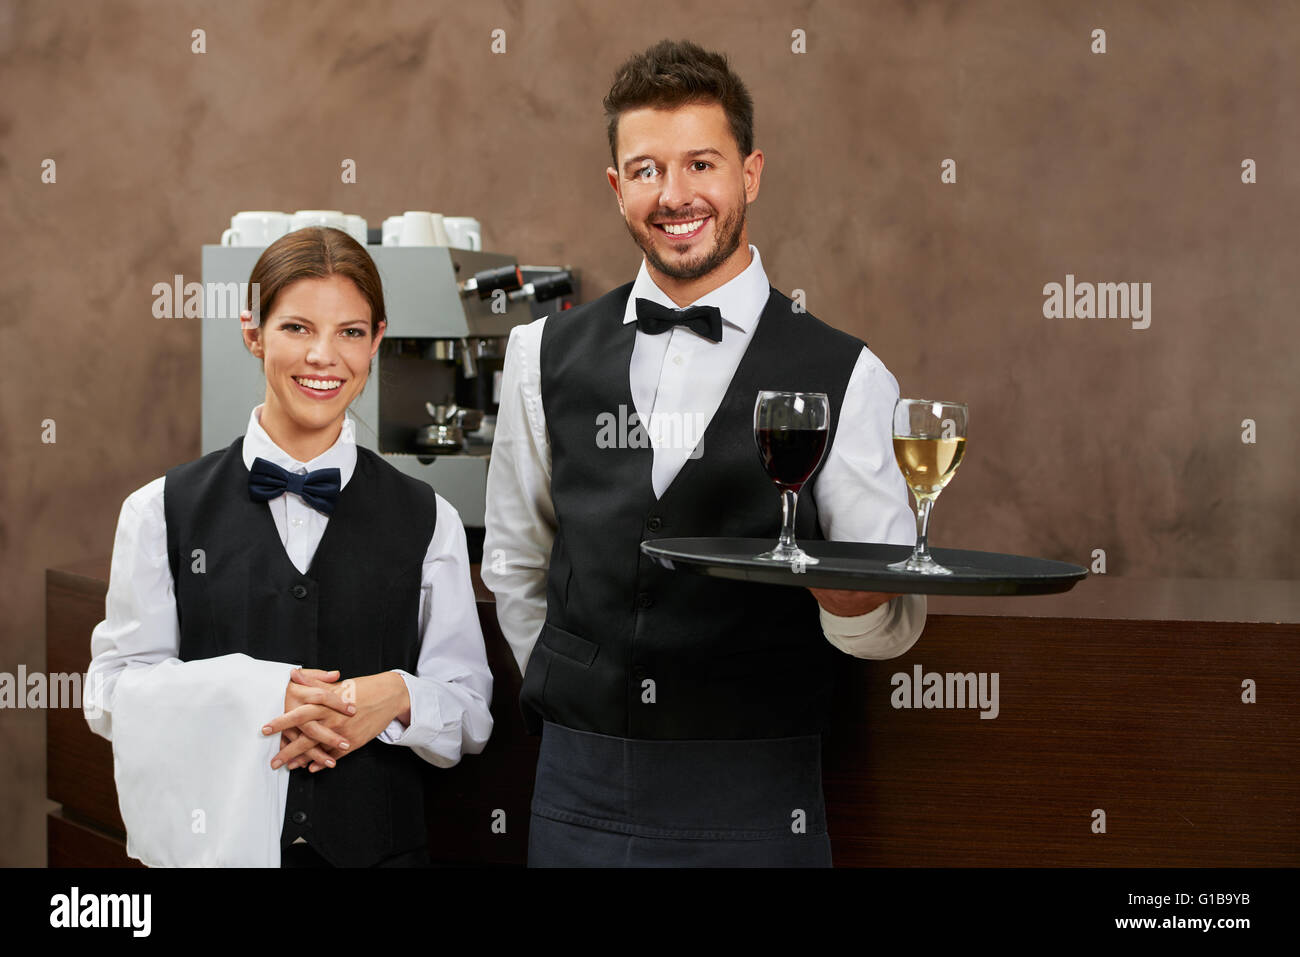 Waiter and waitress serving drinks in a hotel restaurant Stock Photo